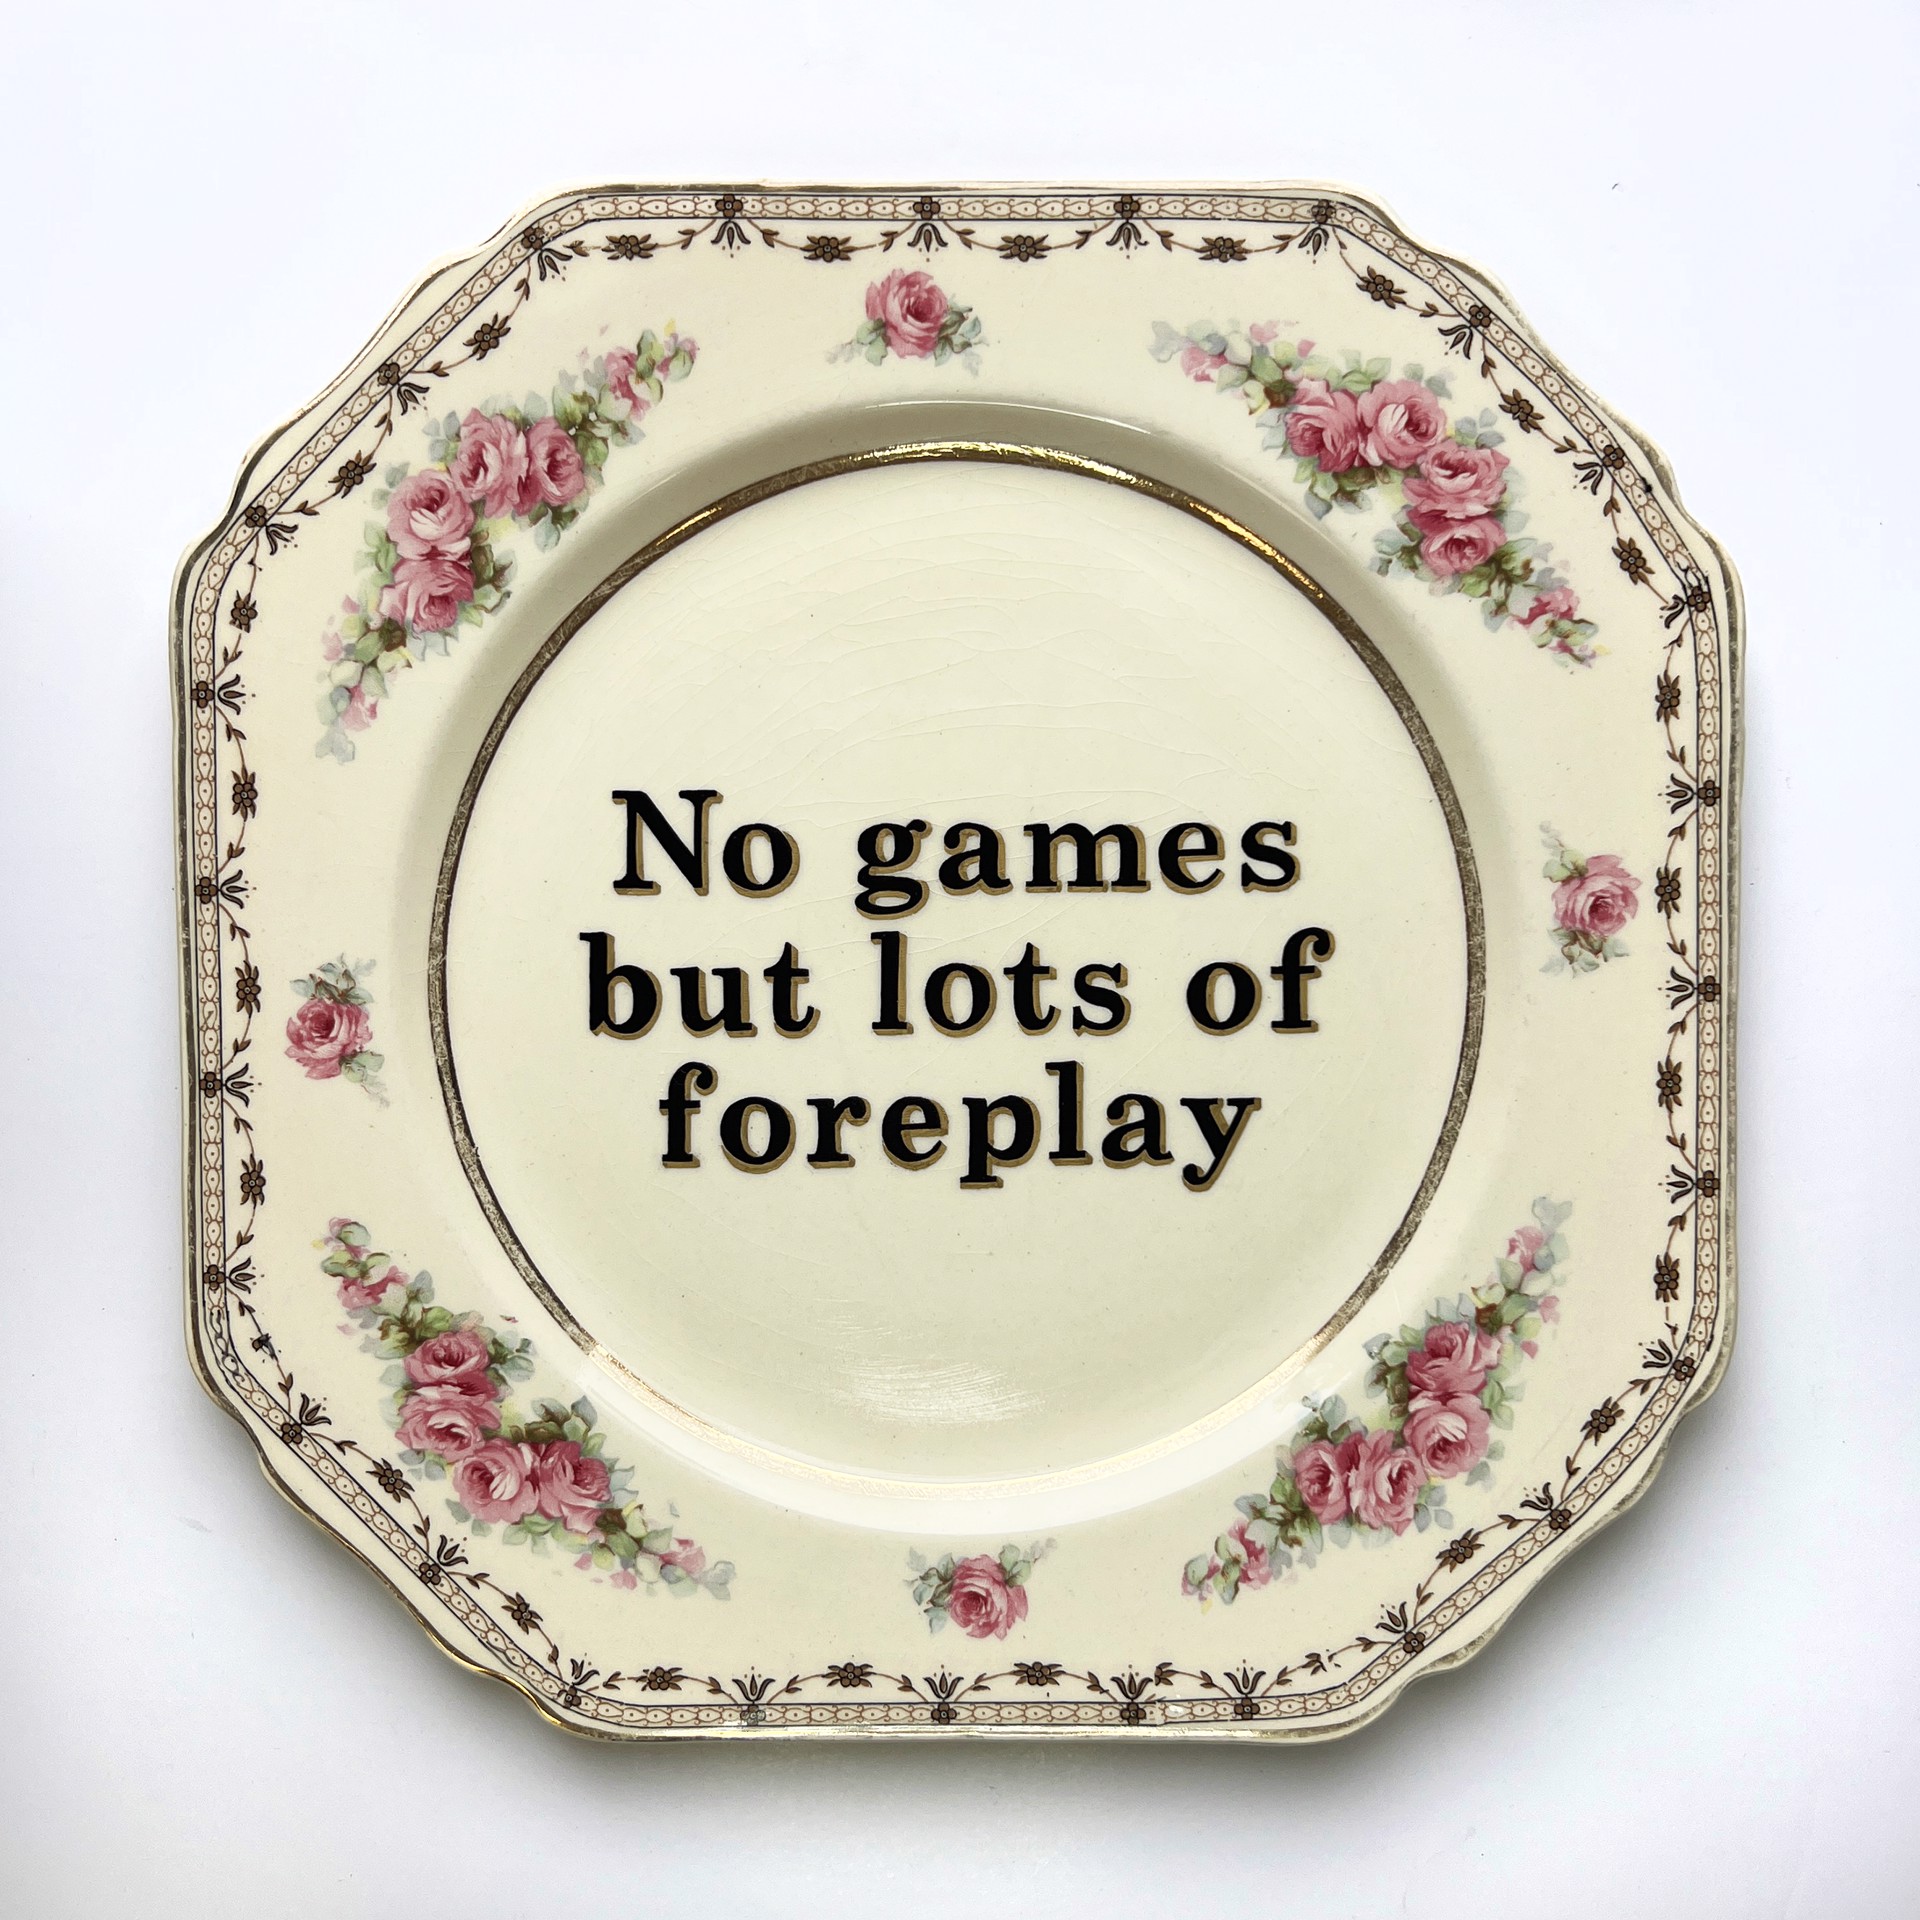 No games but lots of foreplay by Marie-Claude Marquis